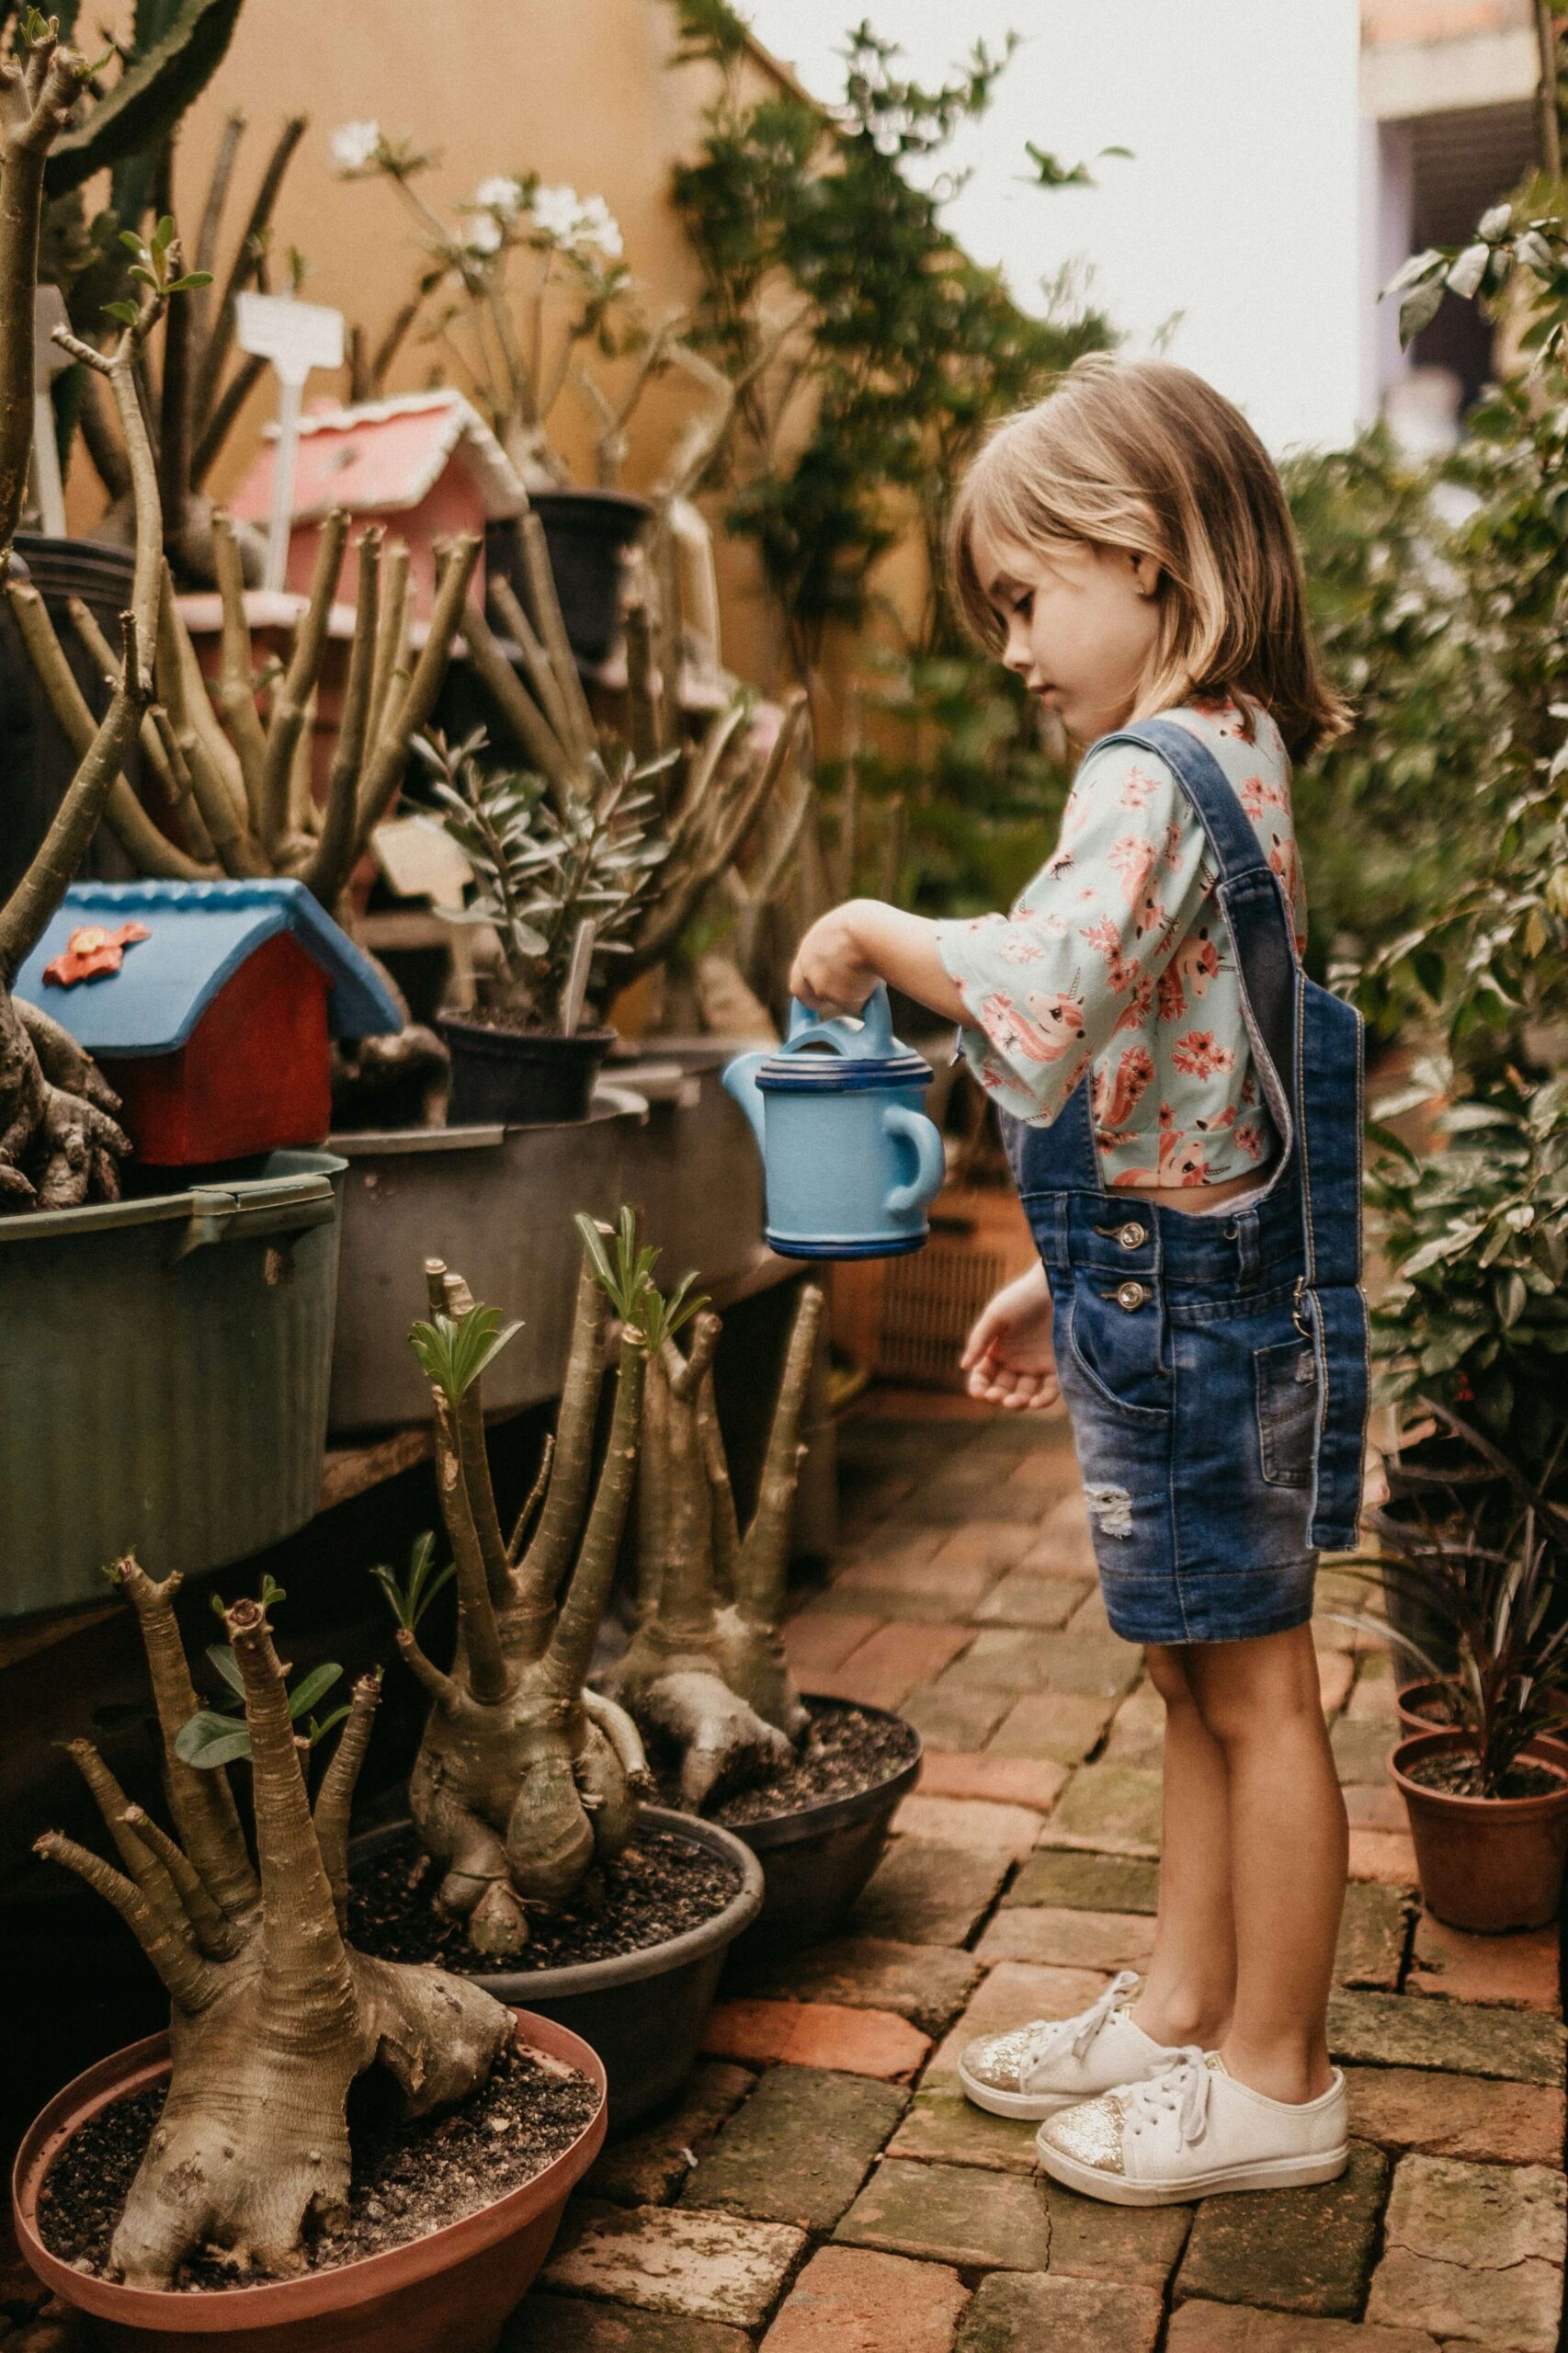 Image of a small girl watering plants with a blue watering can. Help your child effectively cope with anxiety by working with a therapist in anxiety therapy in Saint Petersburg, FL.